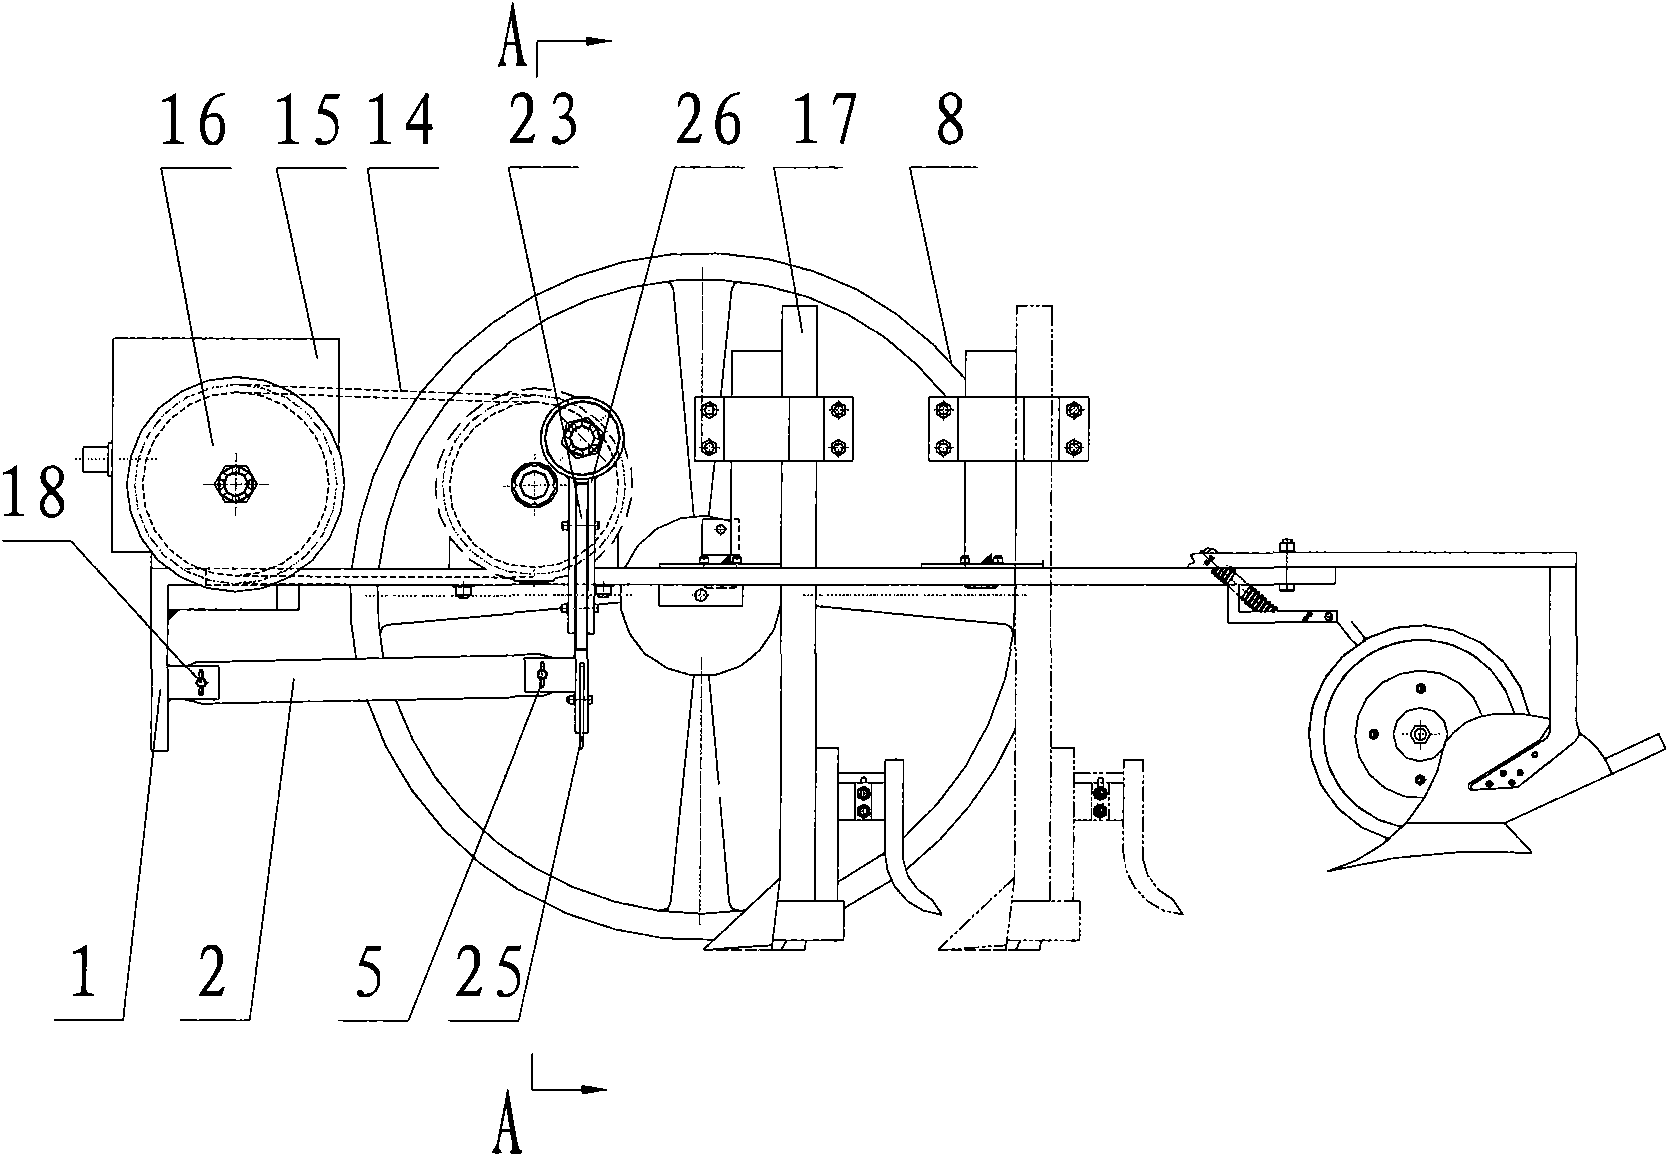 Crank connecting rod power-cutter type anti-plugging device